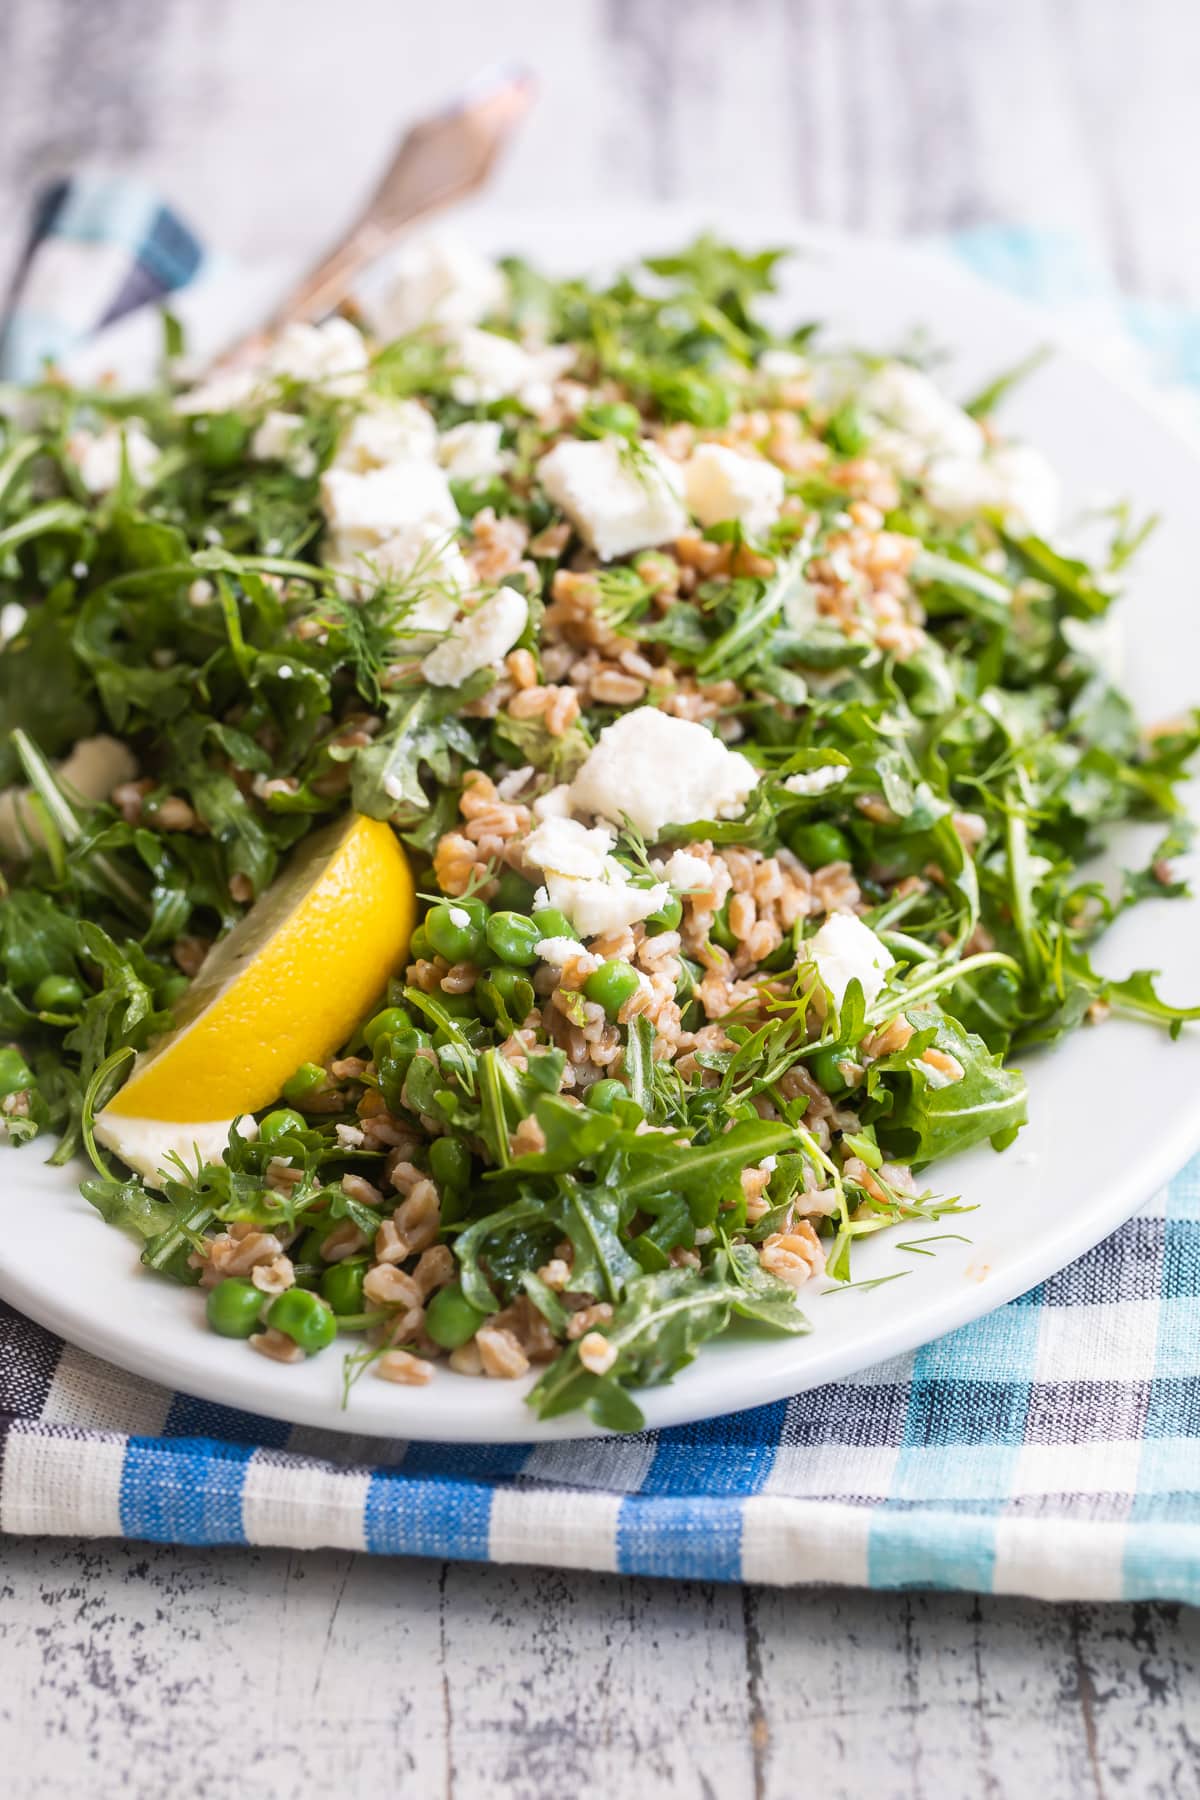 Farro salad with peas and feta on a white plate.